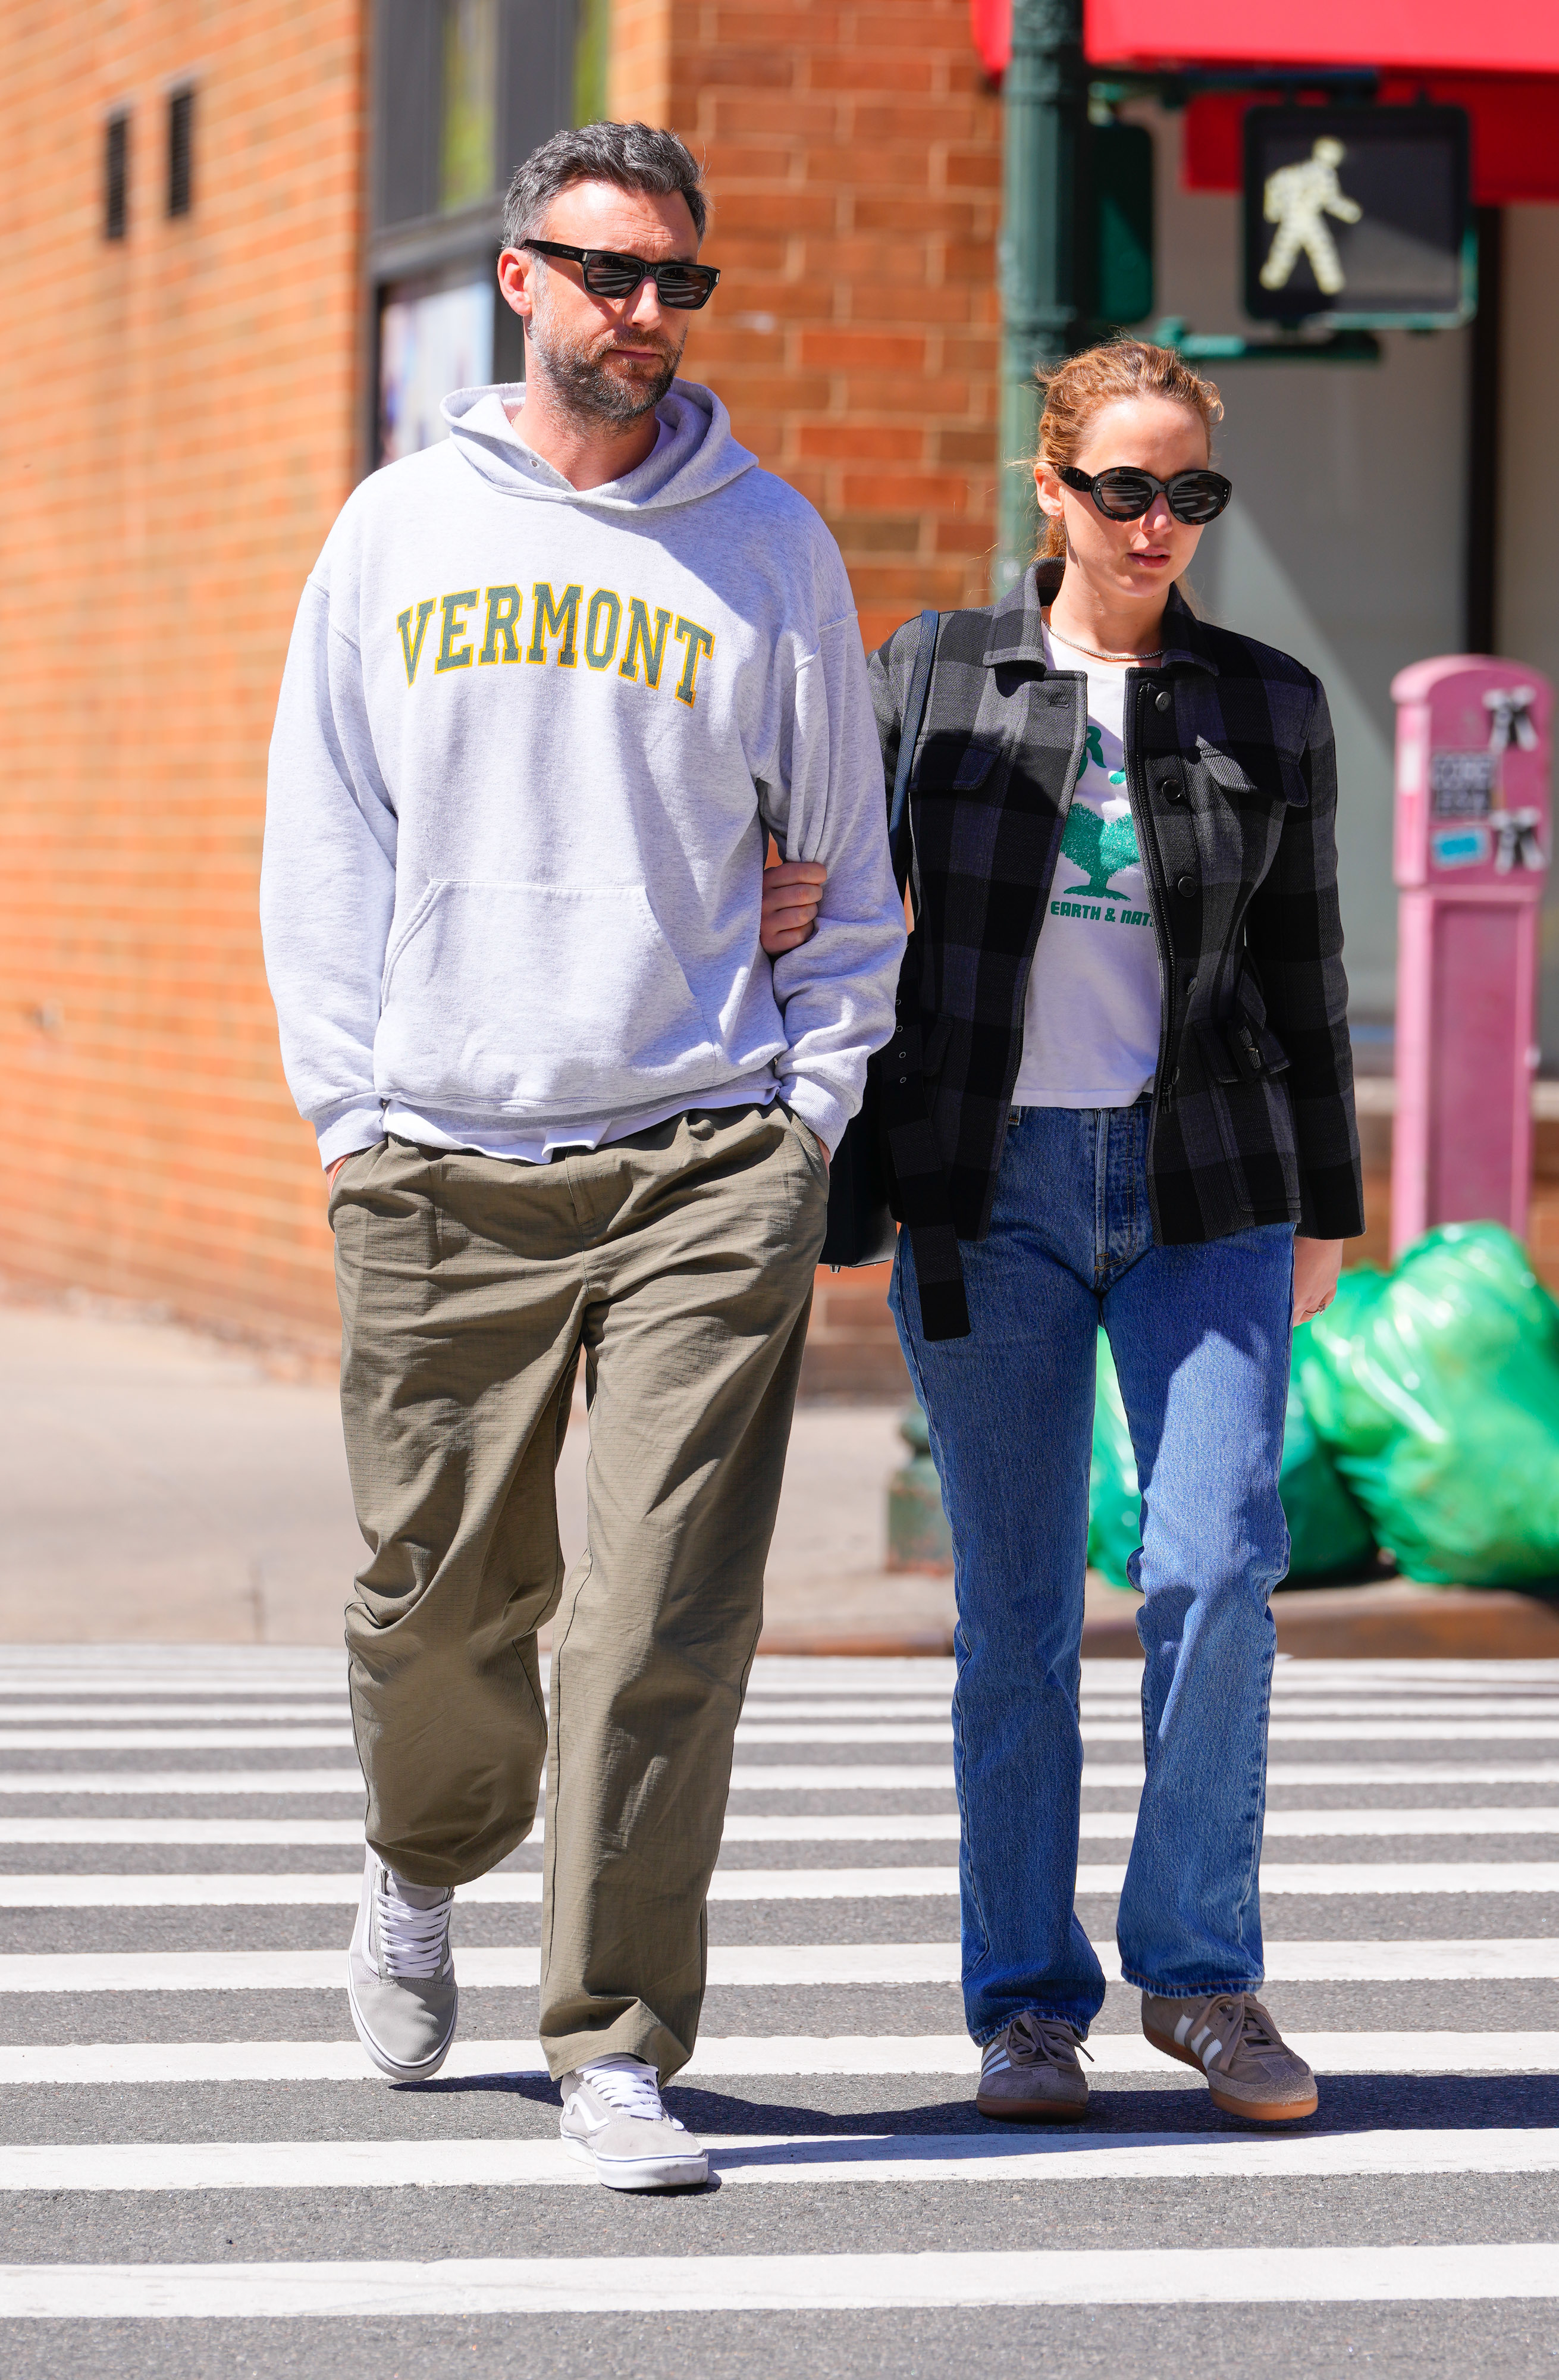 Close-up of Cooke and Jennifer walking on the street